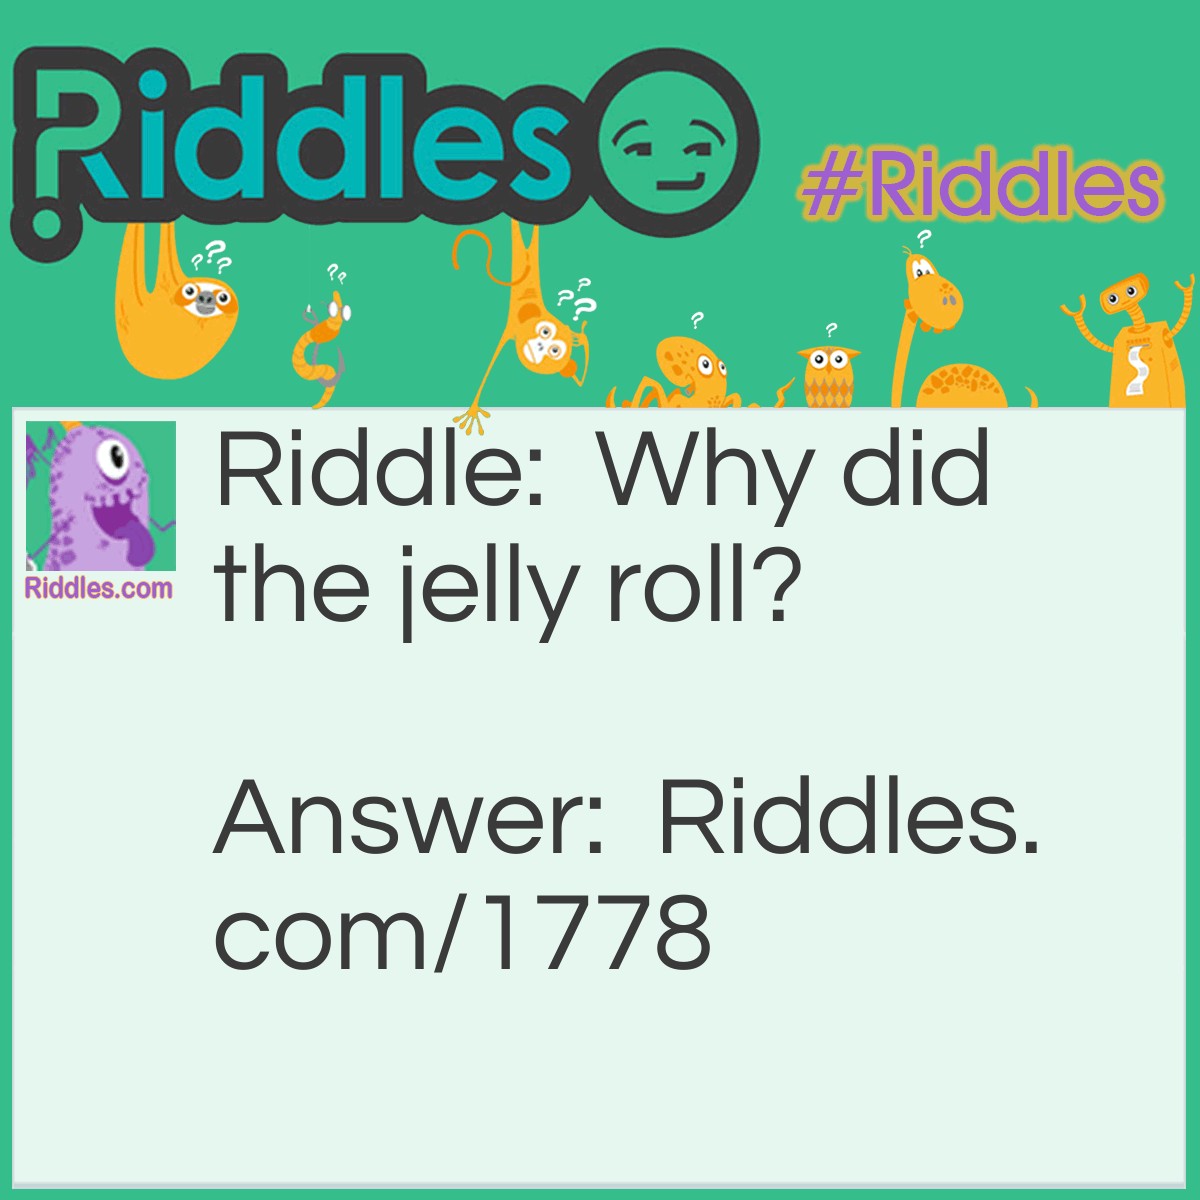 Riddle: Why did the jelly roll? Answer: It saw the apple turn over.